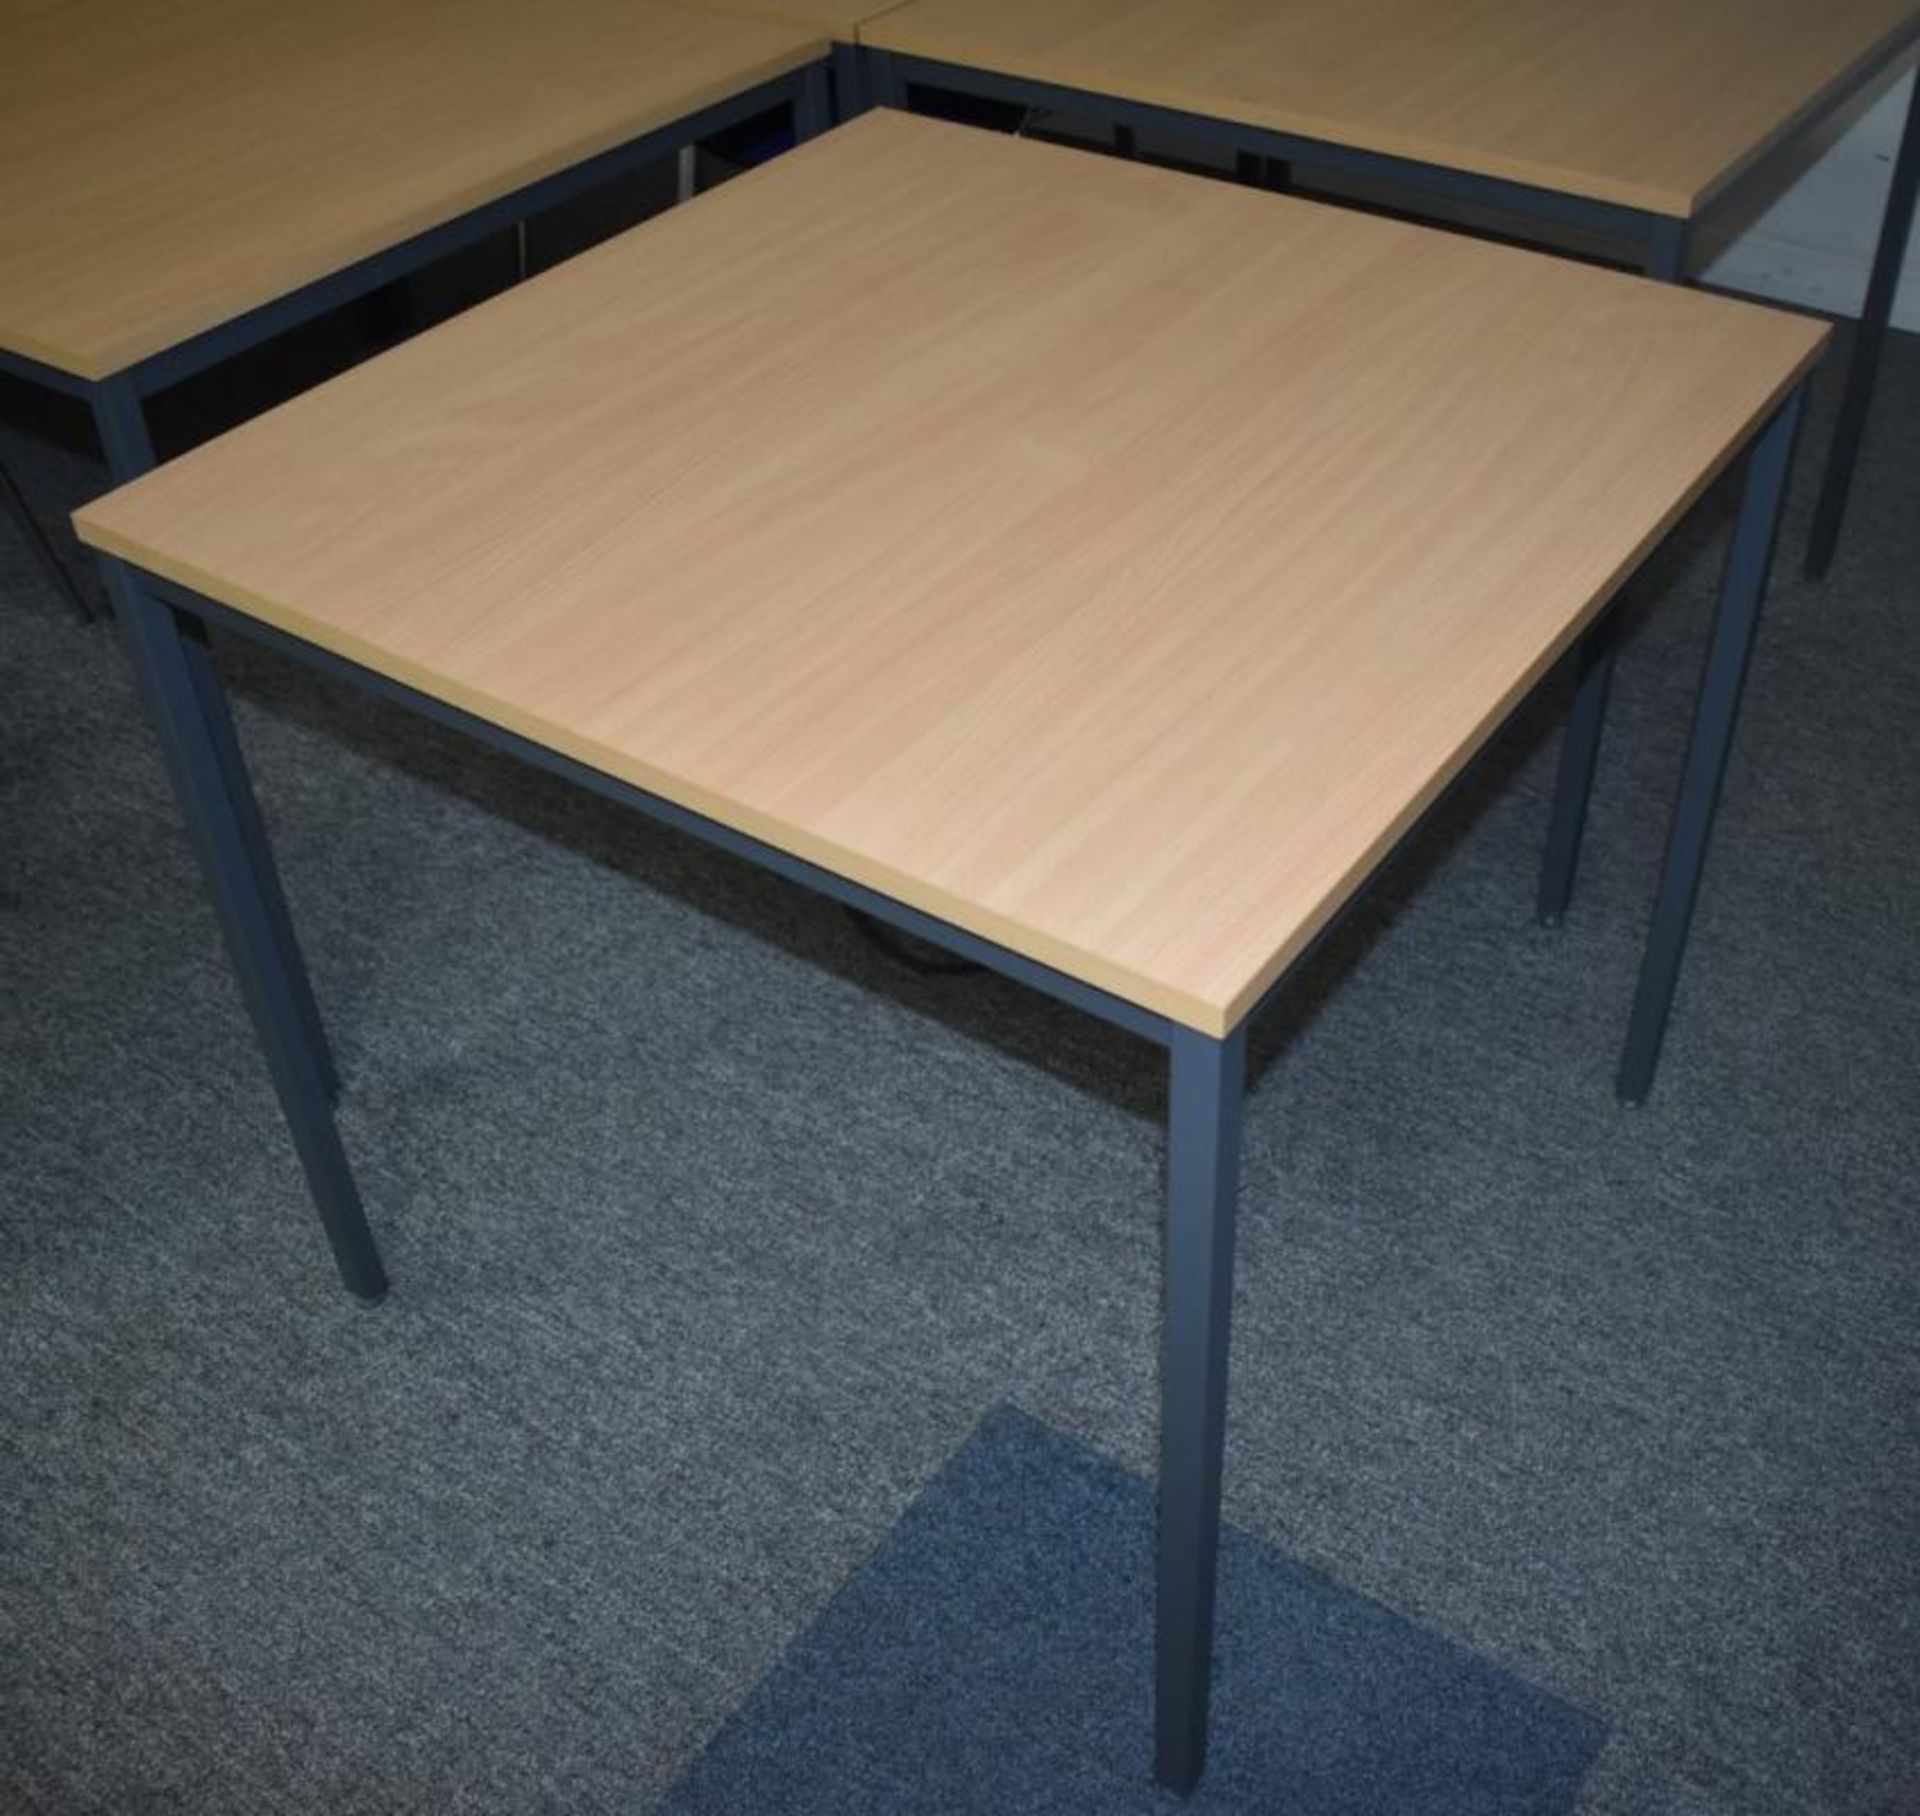 6 x Matching Office Tables With Beech Tops and Dark Grey Bases - CL490 - Location: Putney, London,